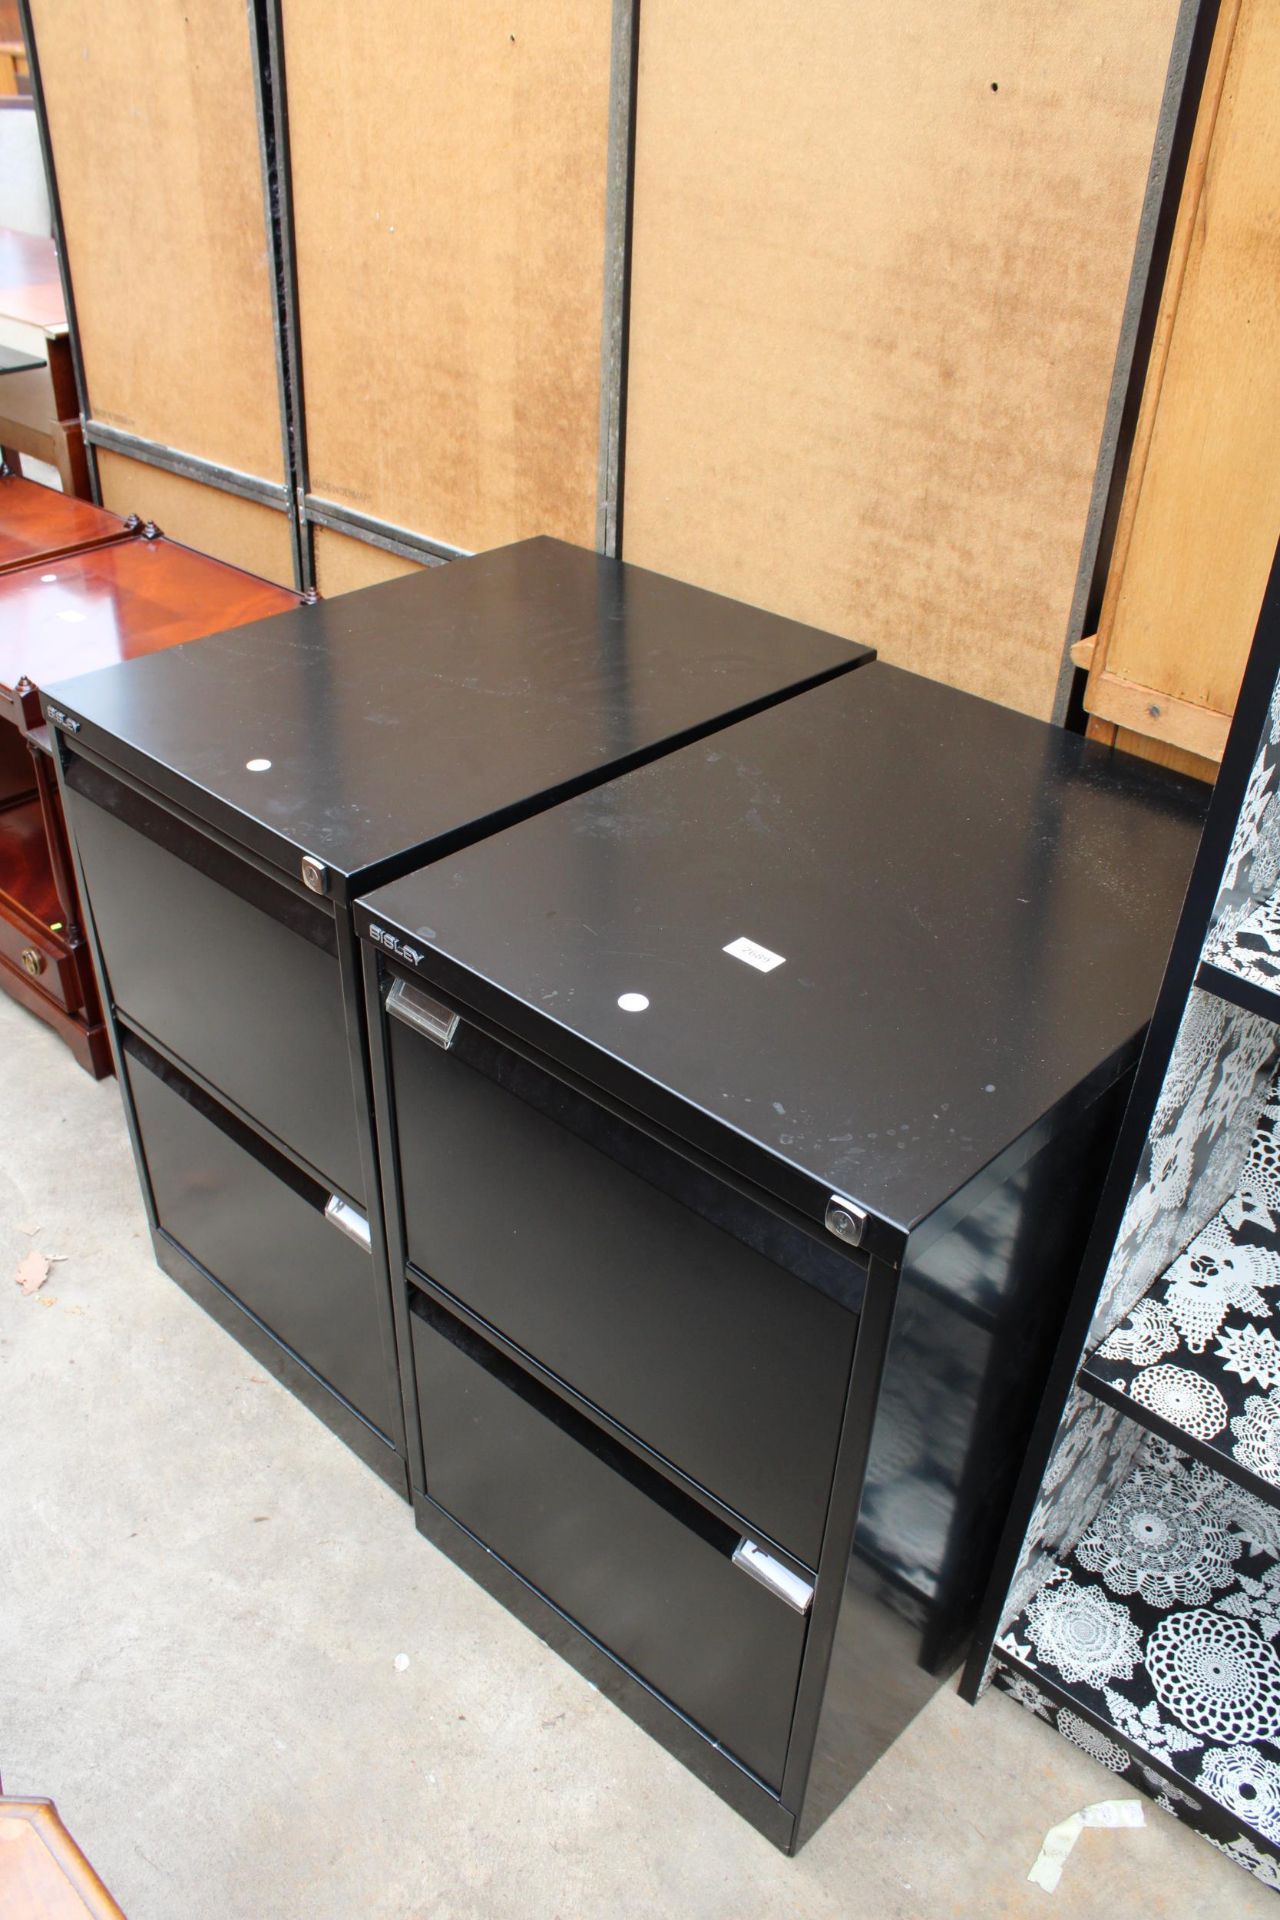 TWO BISLEY FILING CABINETS WITH TWO DRAWERS AND A SMALL OCCASIONAL TABLE